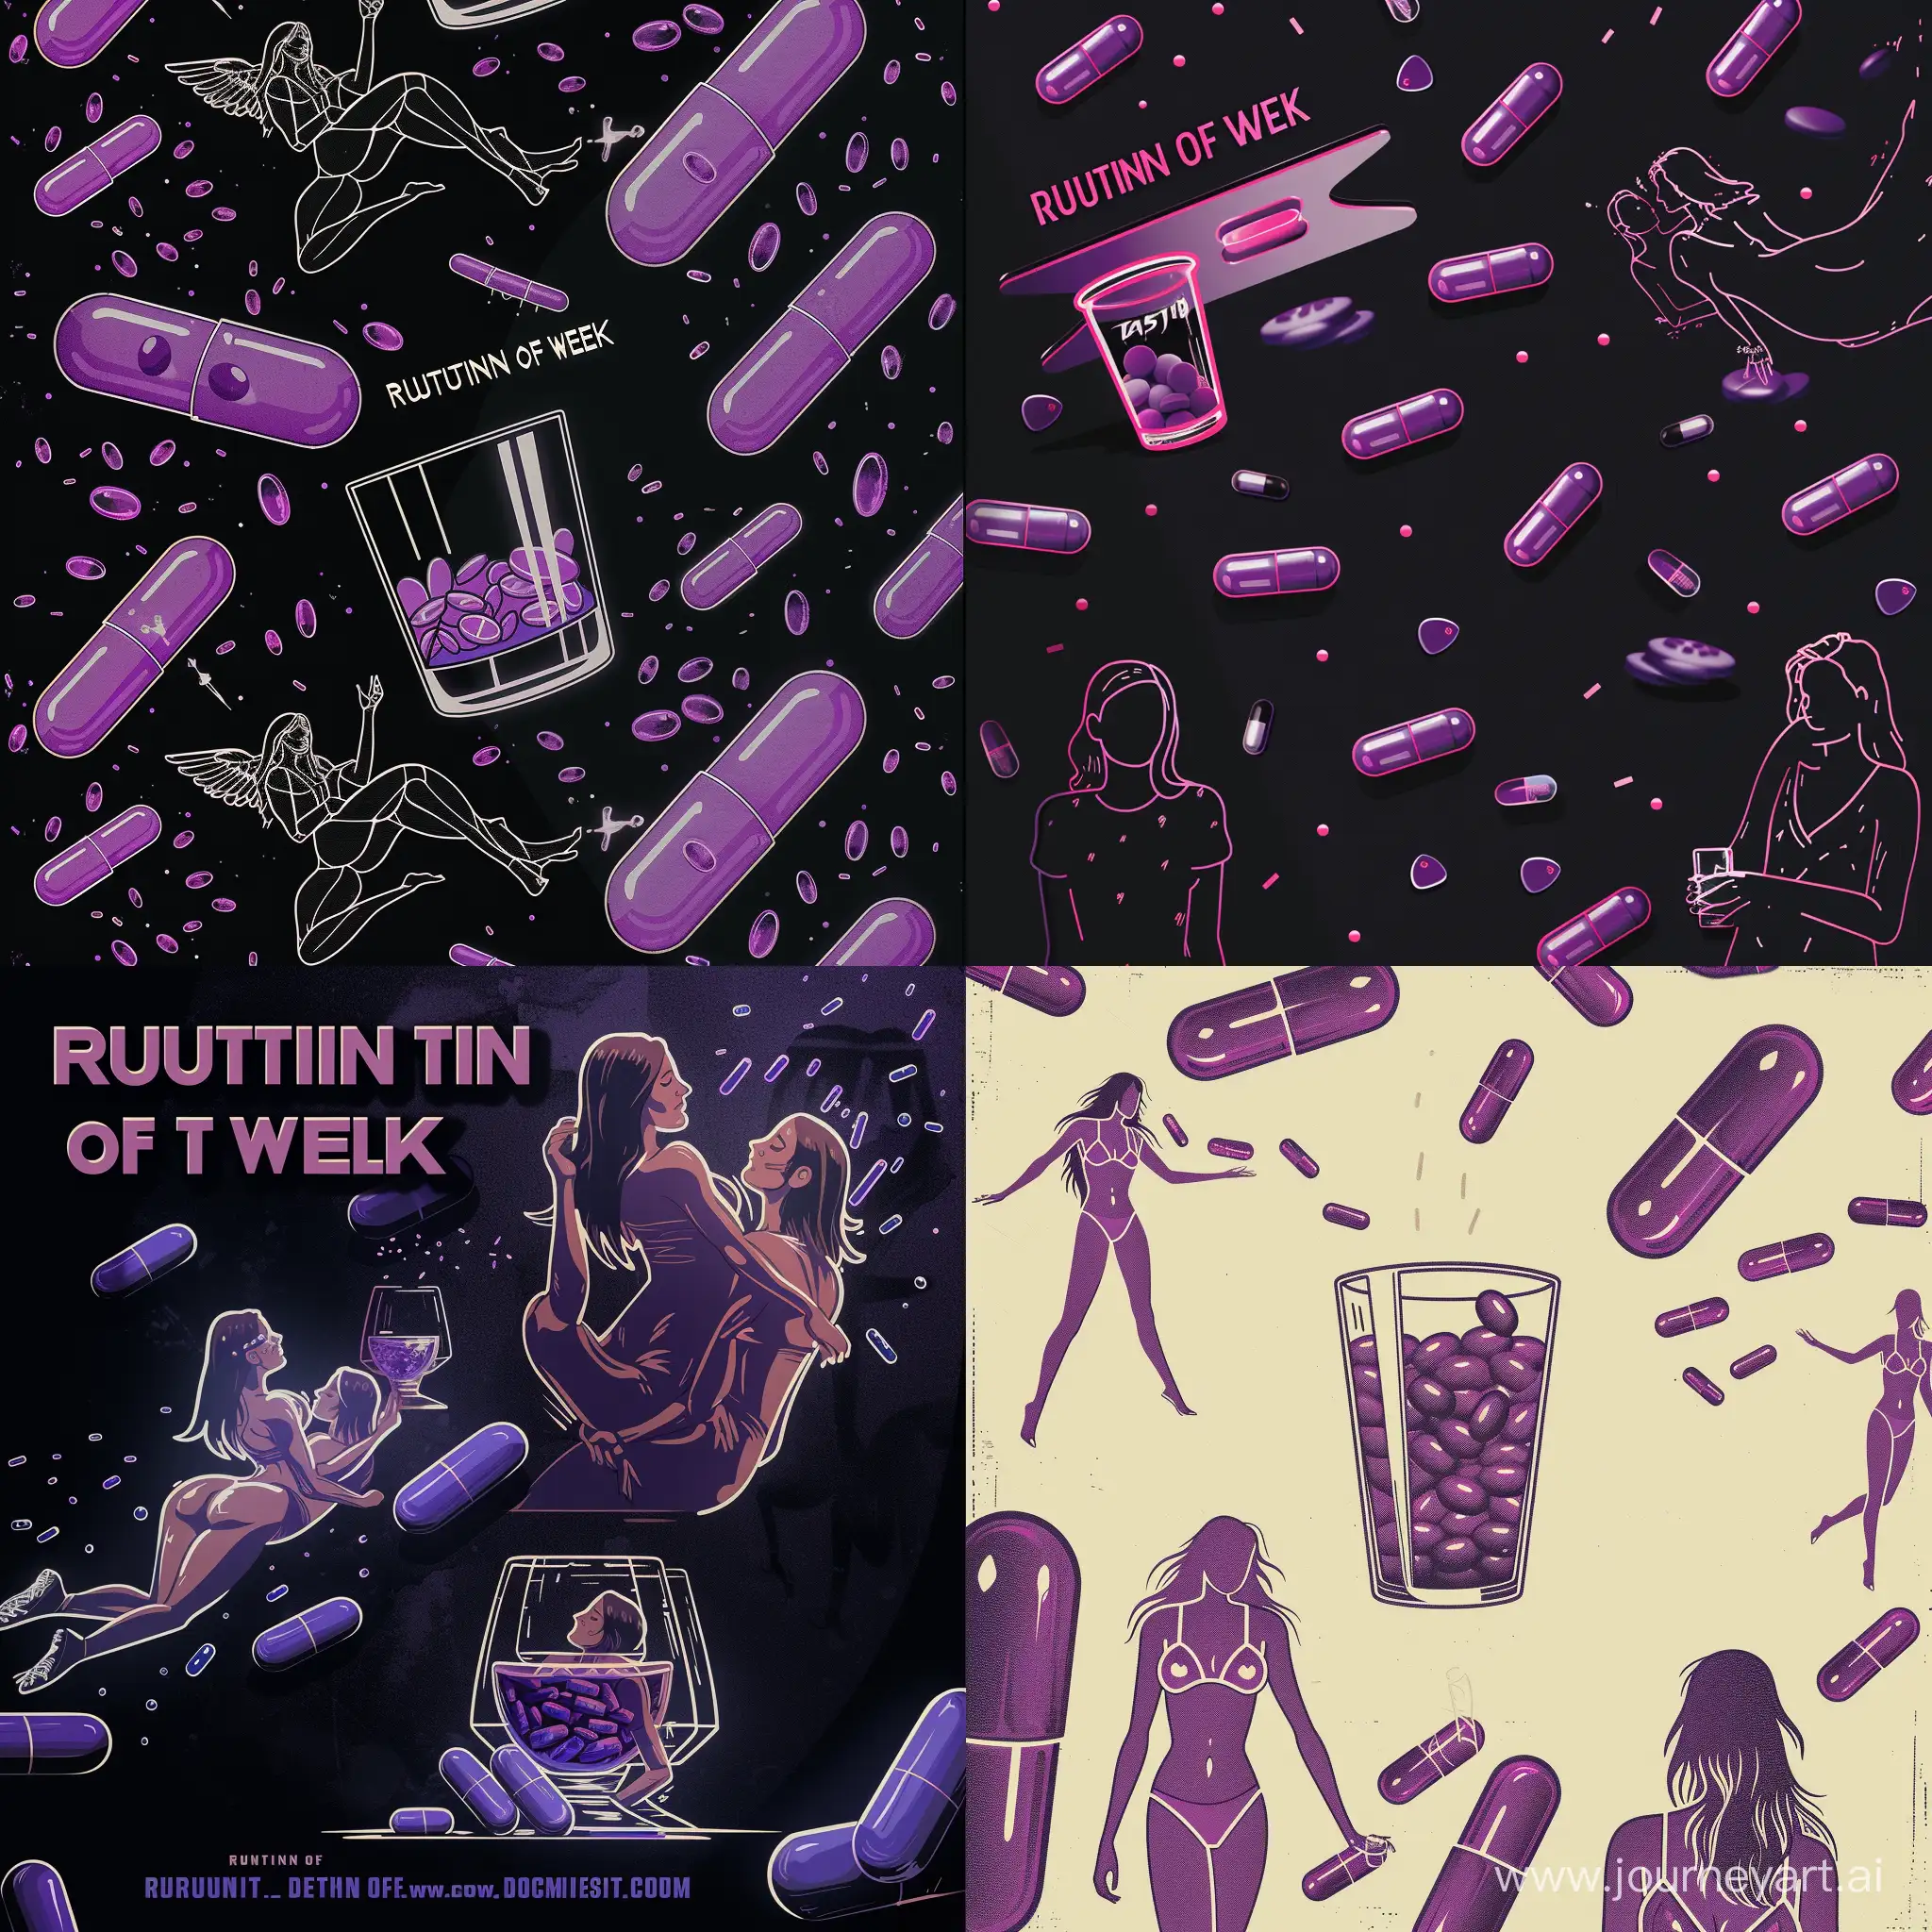 Weekly-Routine-Pills-Flying-Over-Women-Silhouettes-and-Purple-Liquid-Glass